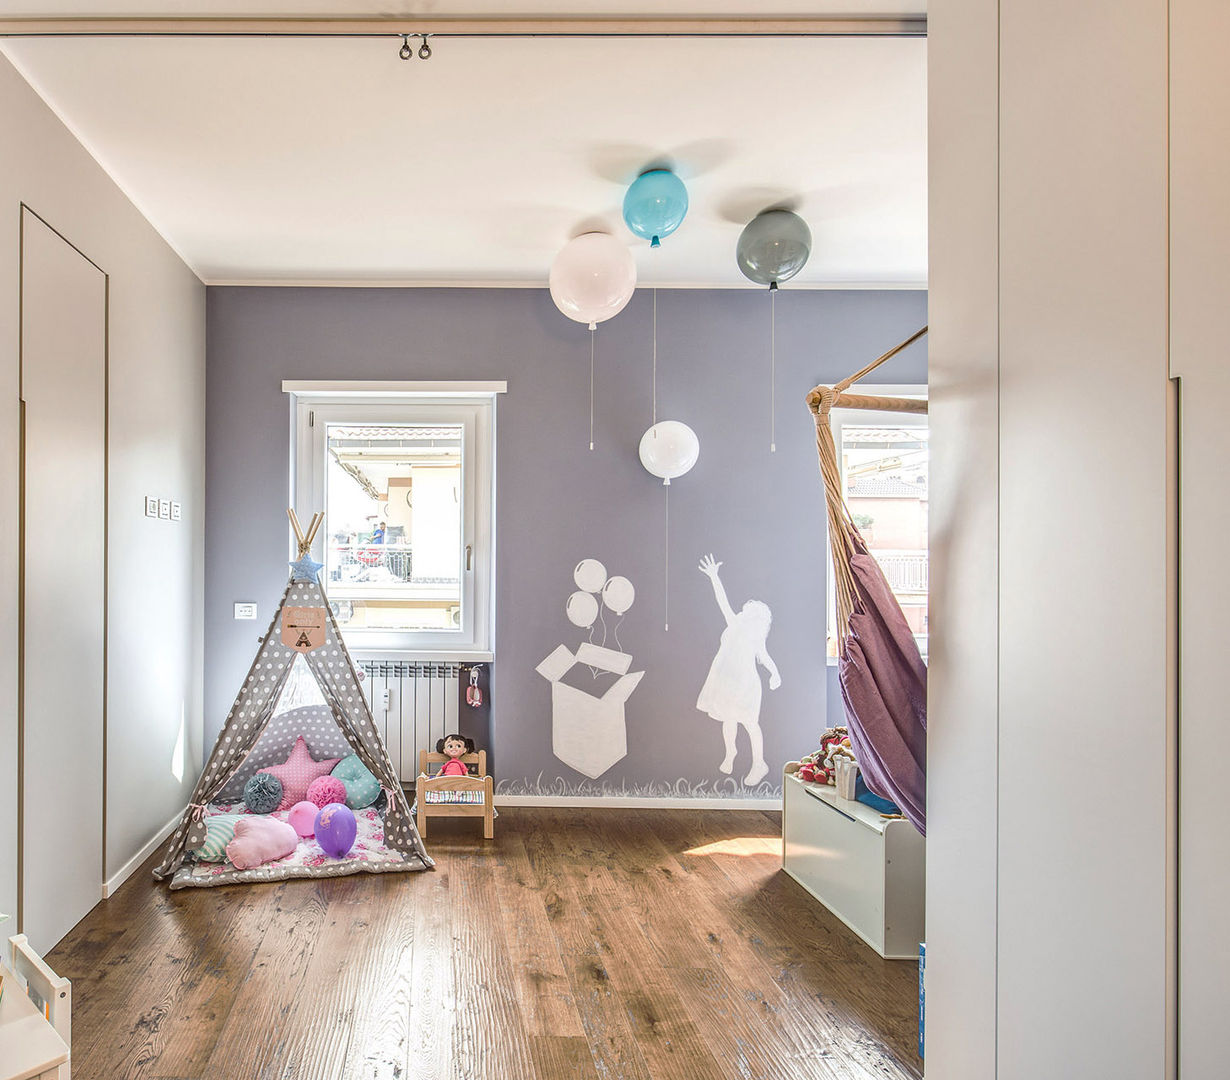 ISIDORO, MOB ARCHITECTS MOB ARCHITECTS Dormitorios infantiles modernos: